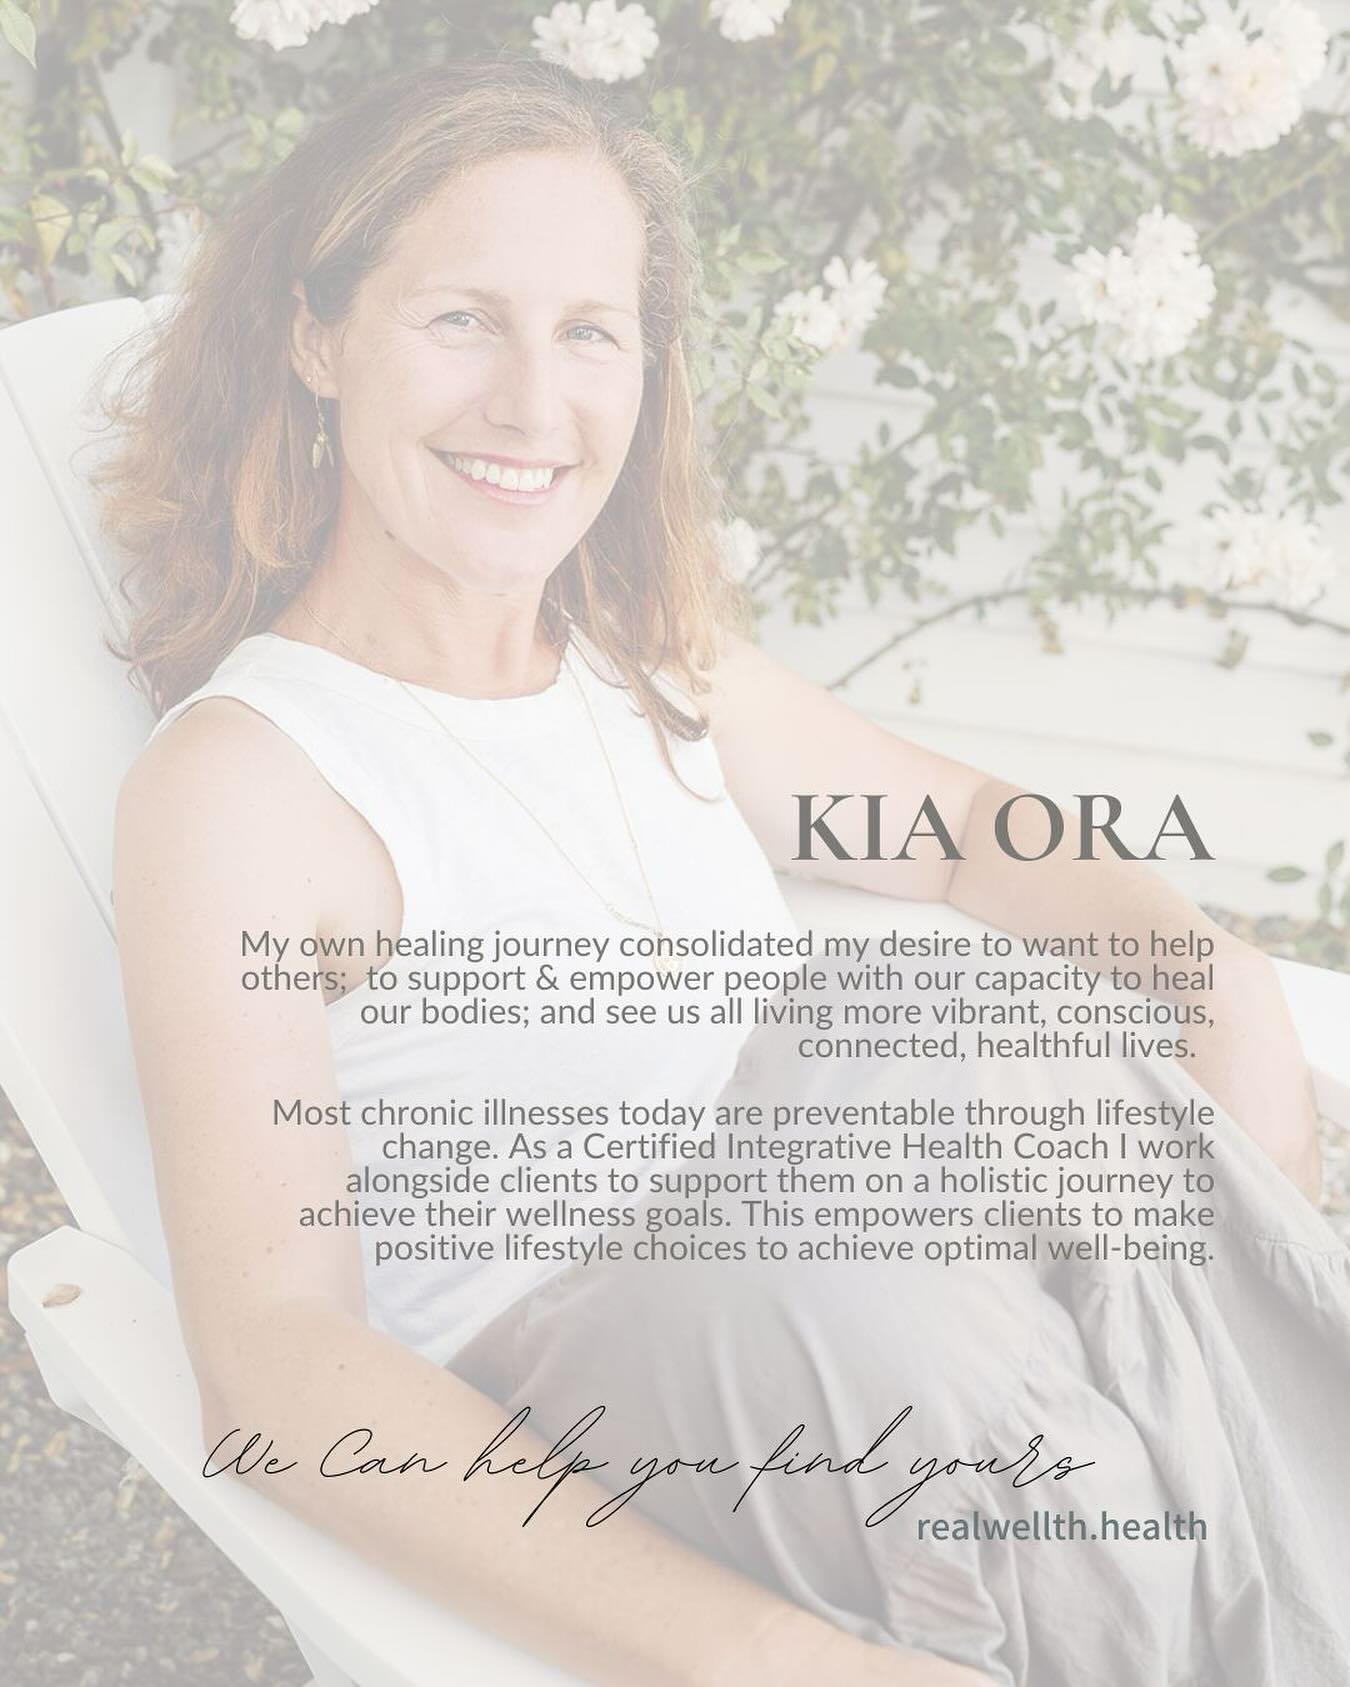 Kia Ora I am Certified Integrative health coach - Ilse Erasmus.  My own healing journey consolidated my desire to want to help others;  to support &amp; empower people with our capacity to heal our bodies; and see us all living more vibrant, consciou